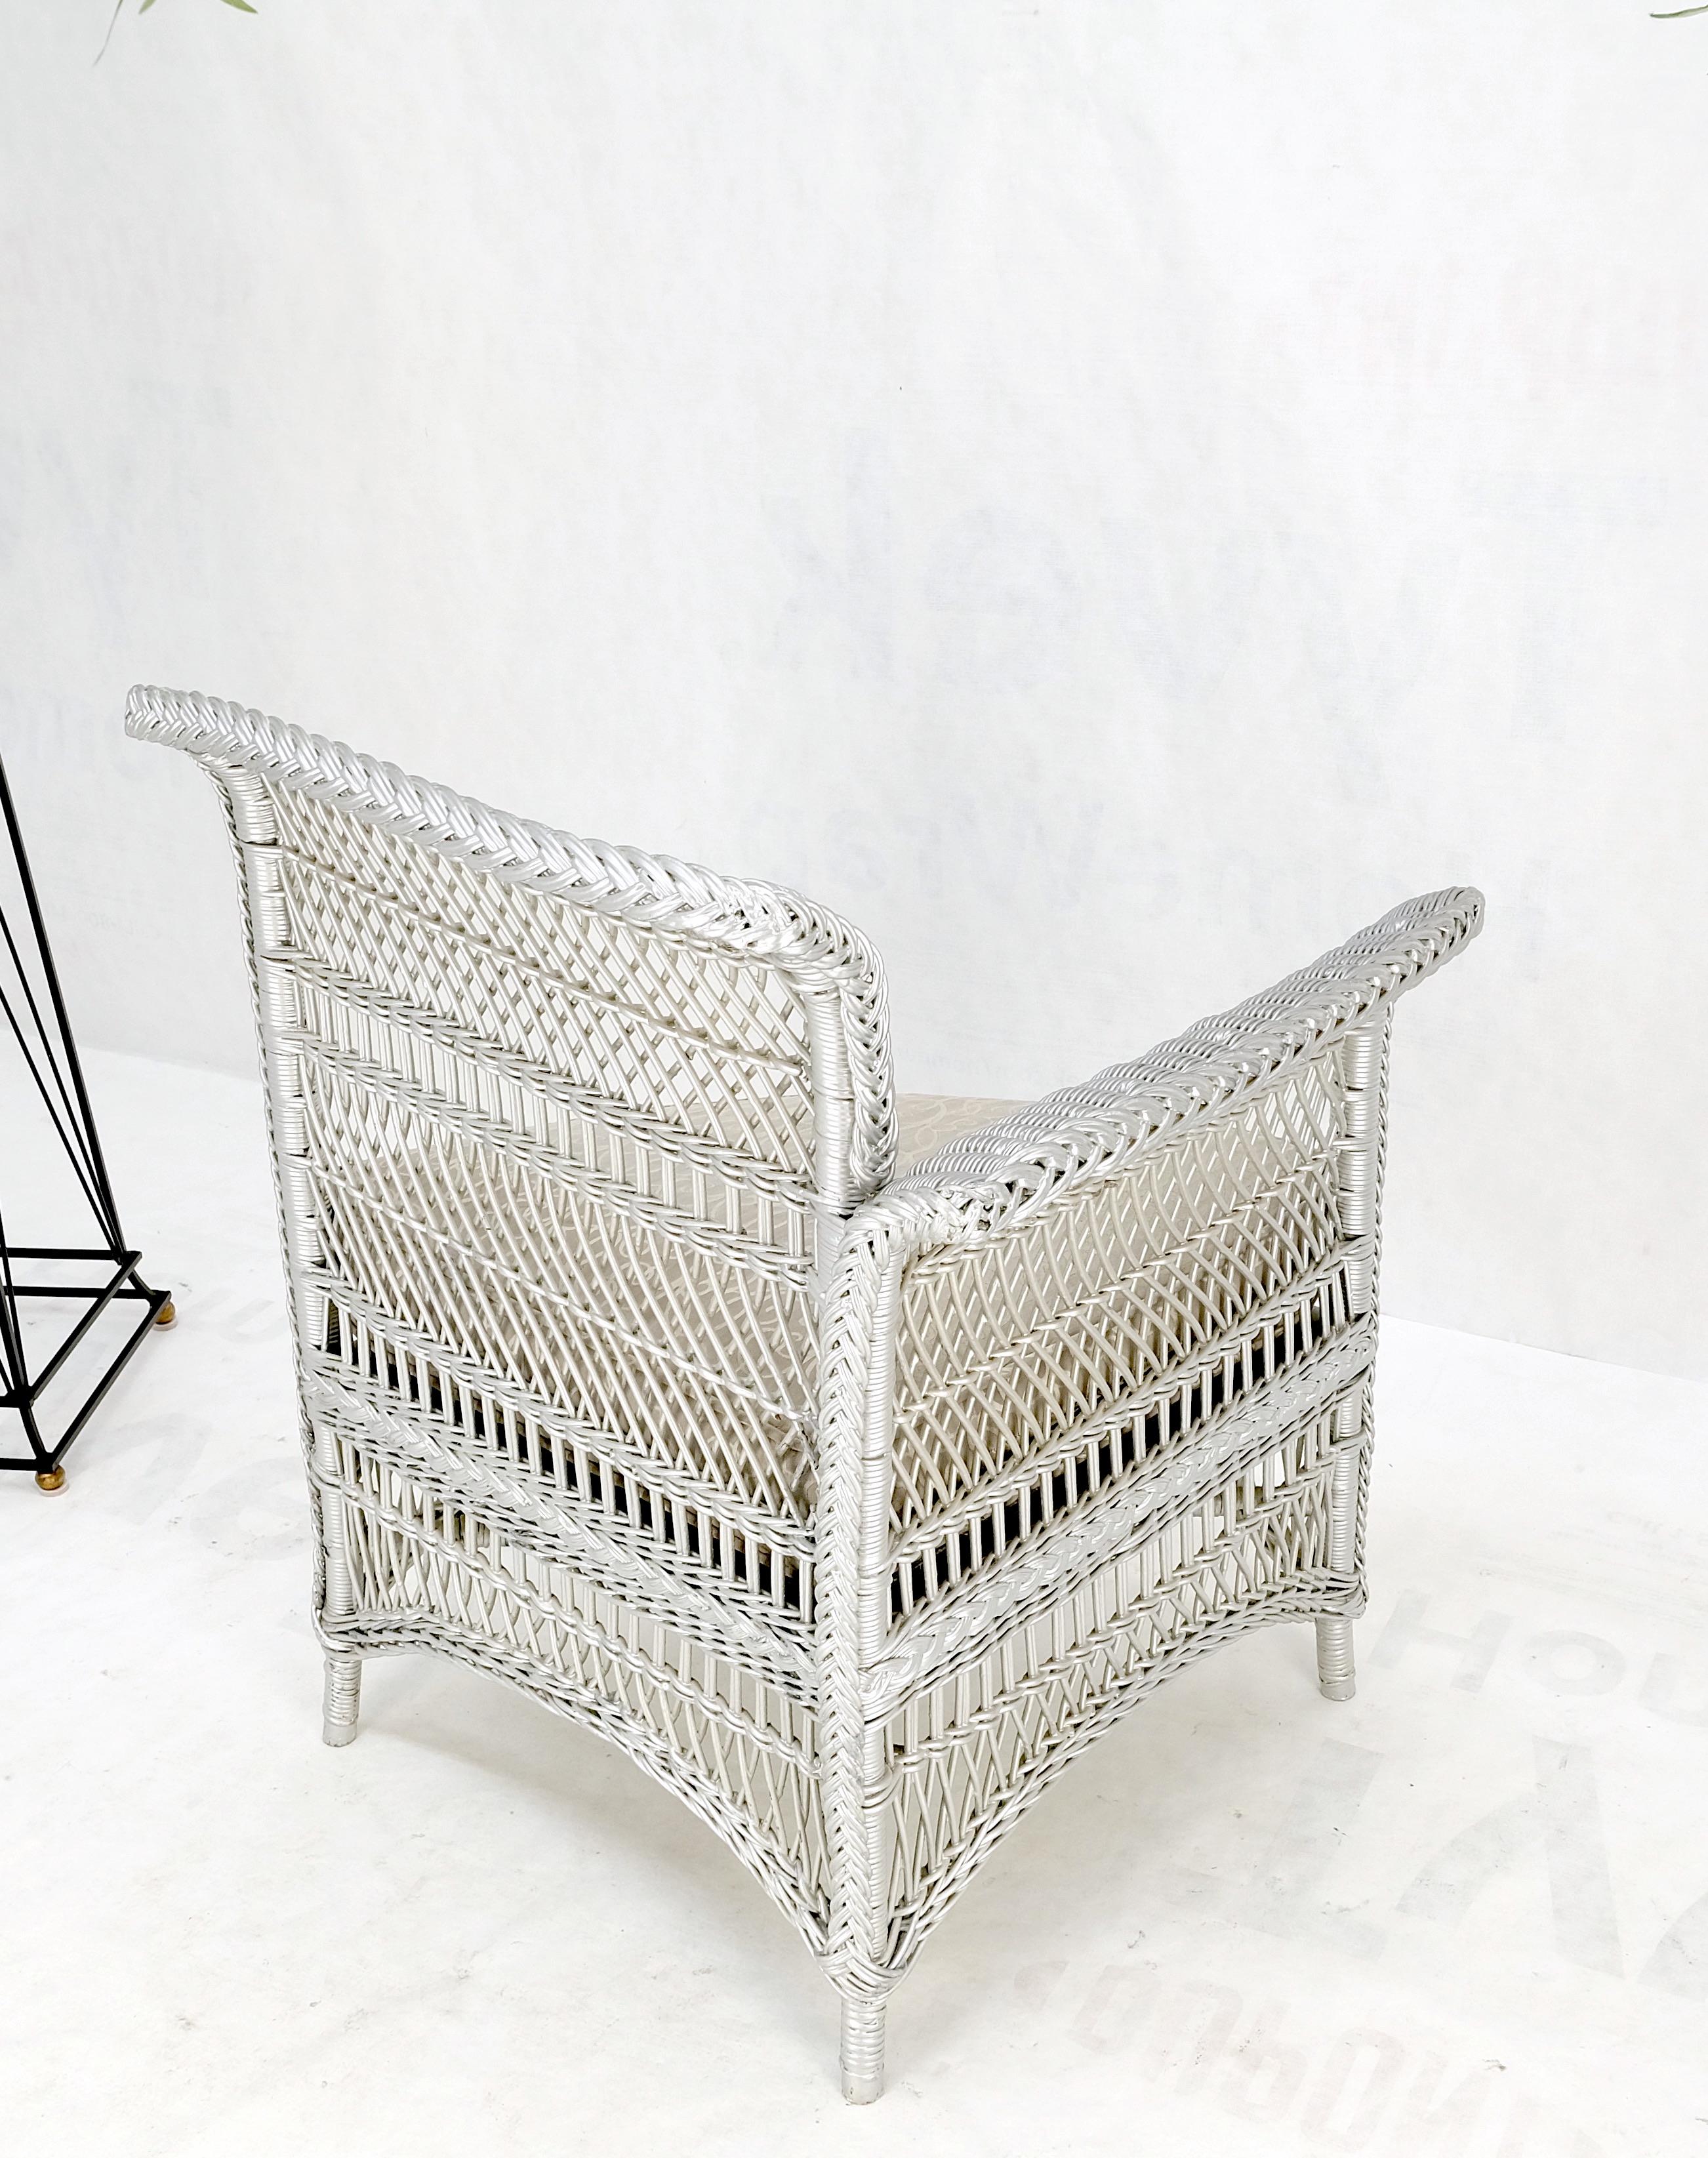 Antique Wicker Corner Chair Finished Painted in Silver Metal Finish Mint For Sale 6